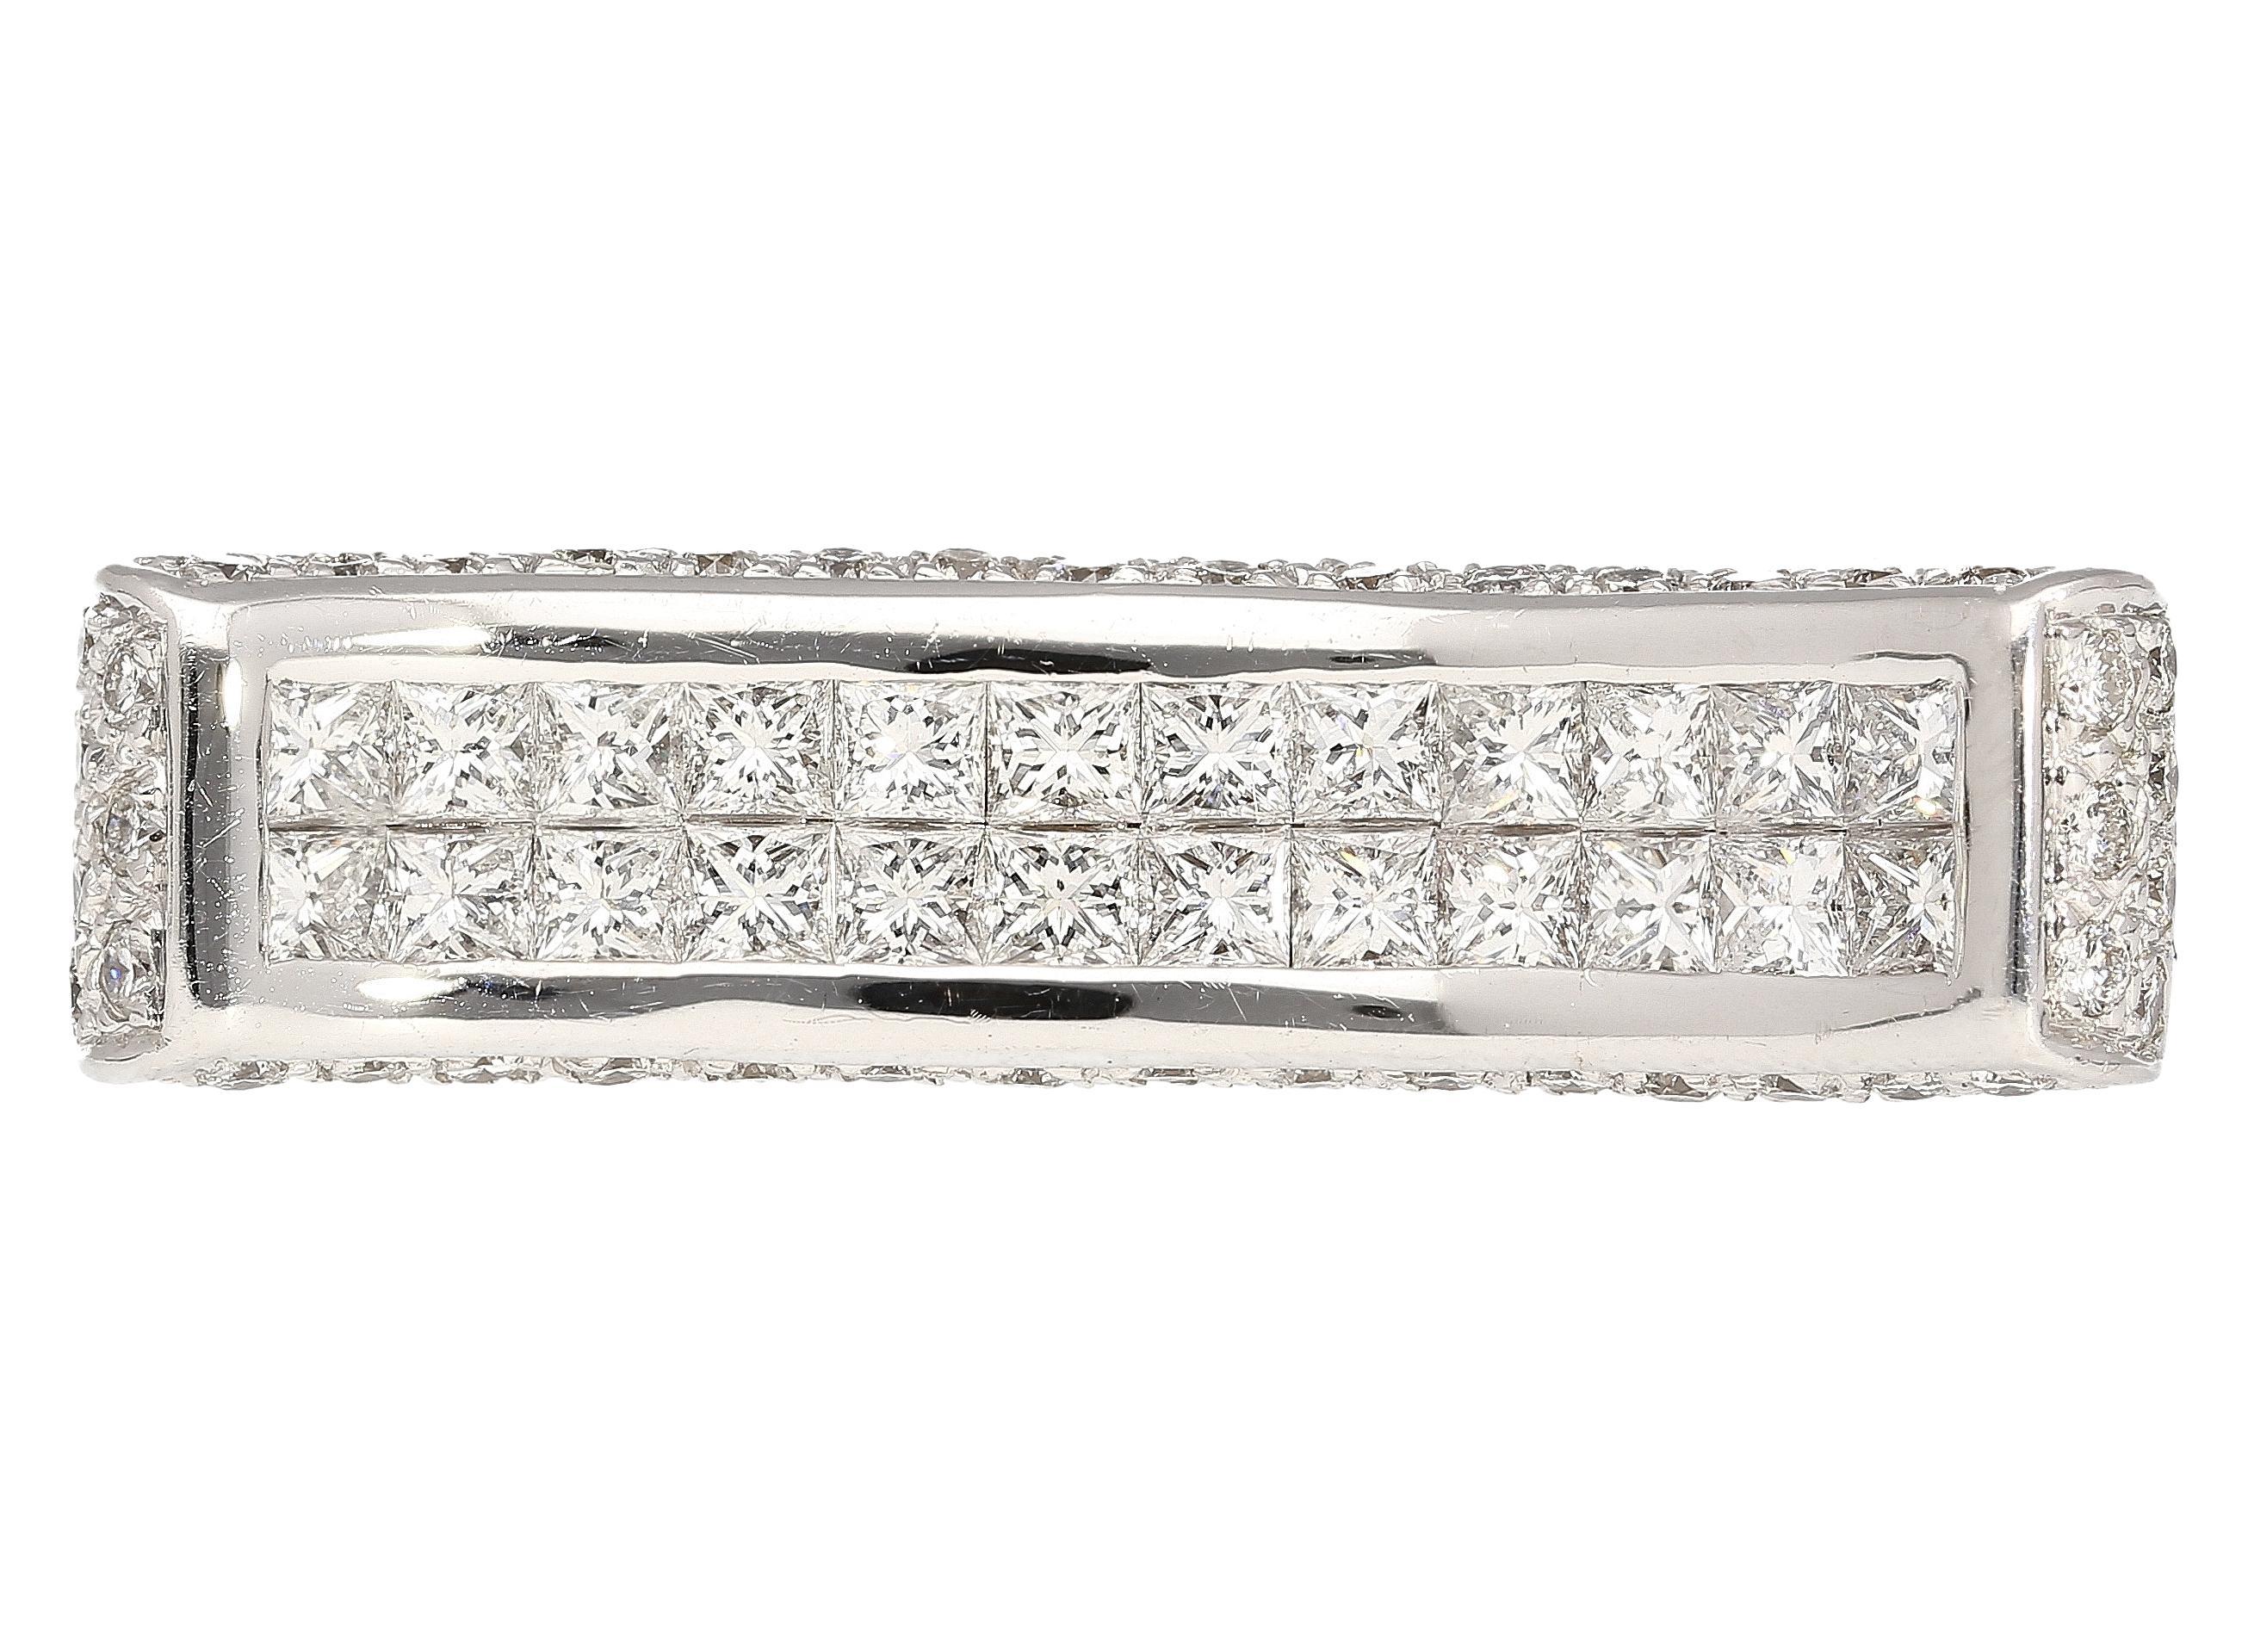 2 carat princess cut diamond encrusted curving ring. 16 princess cut diamonds on the face of the ring totaling 0.89 carats. 72 round cut diamonds on the sides of the curved ring, totaling 1.11 carats. Diamonds set in bezel and pave setting. The ring